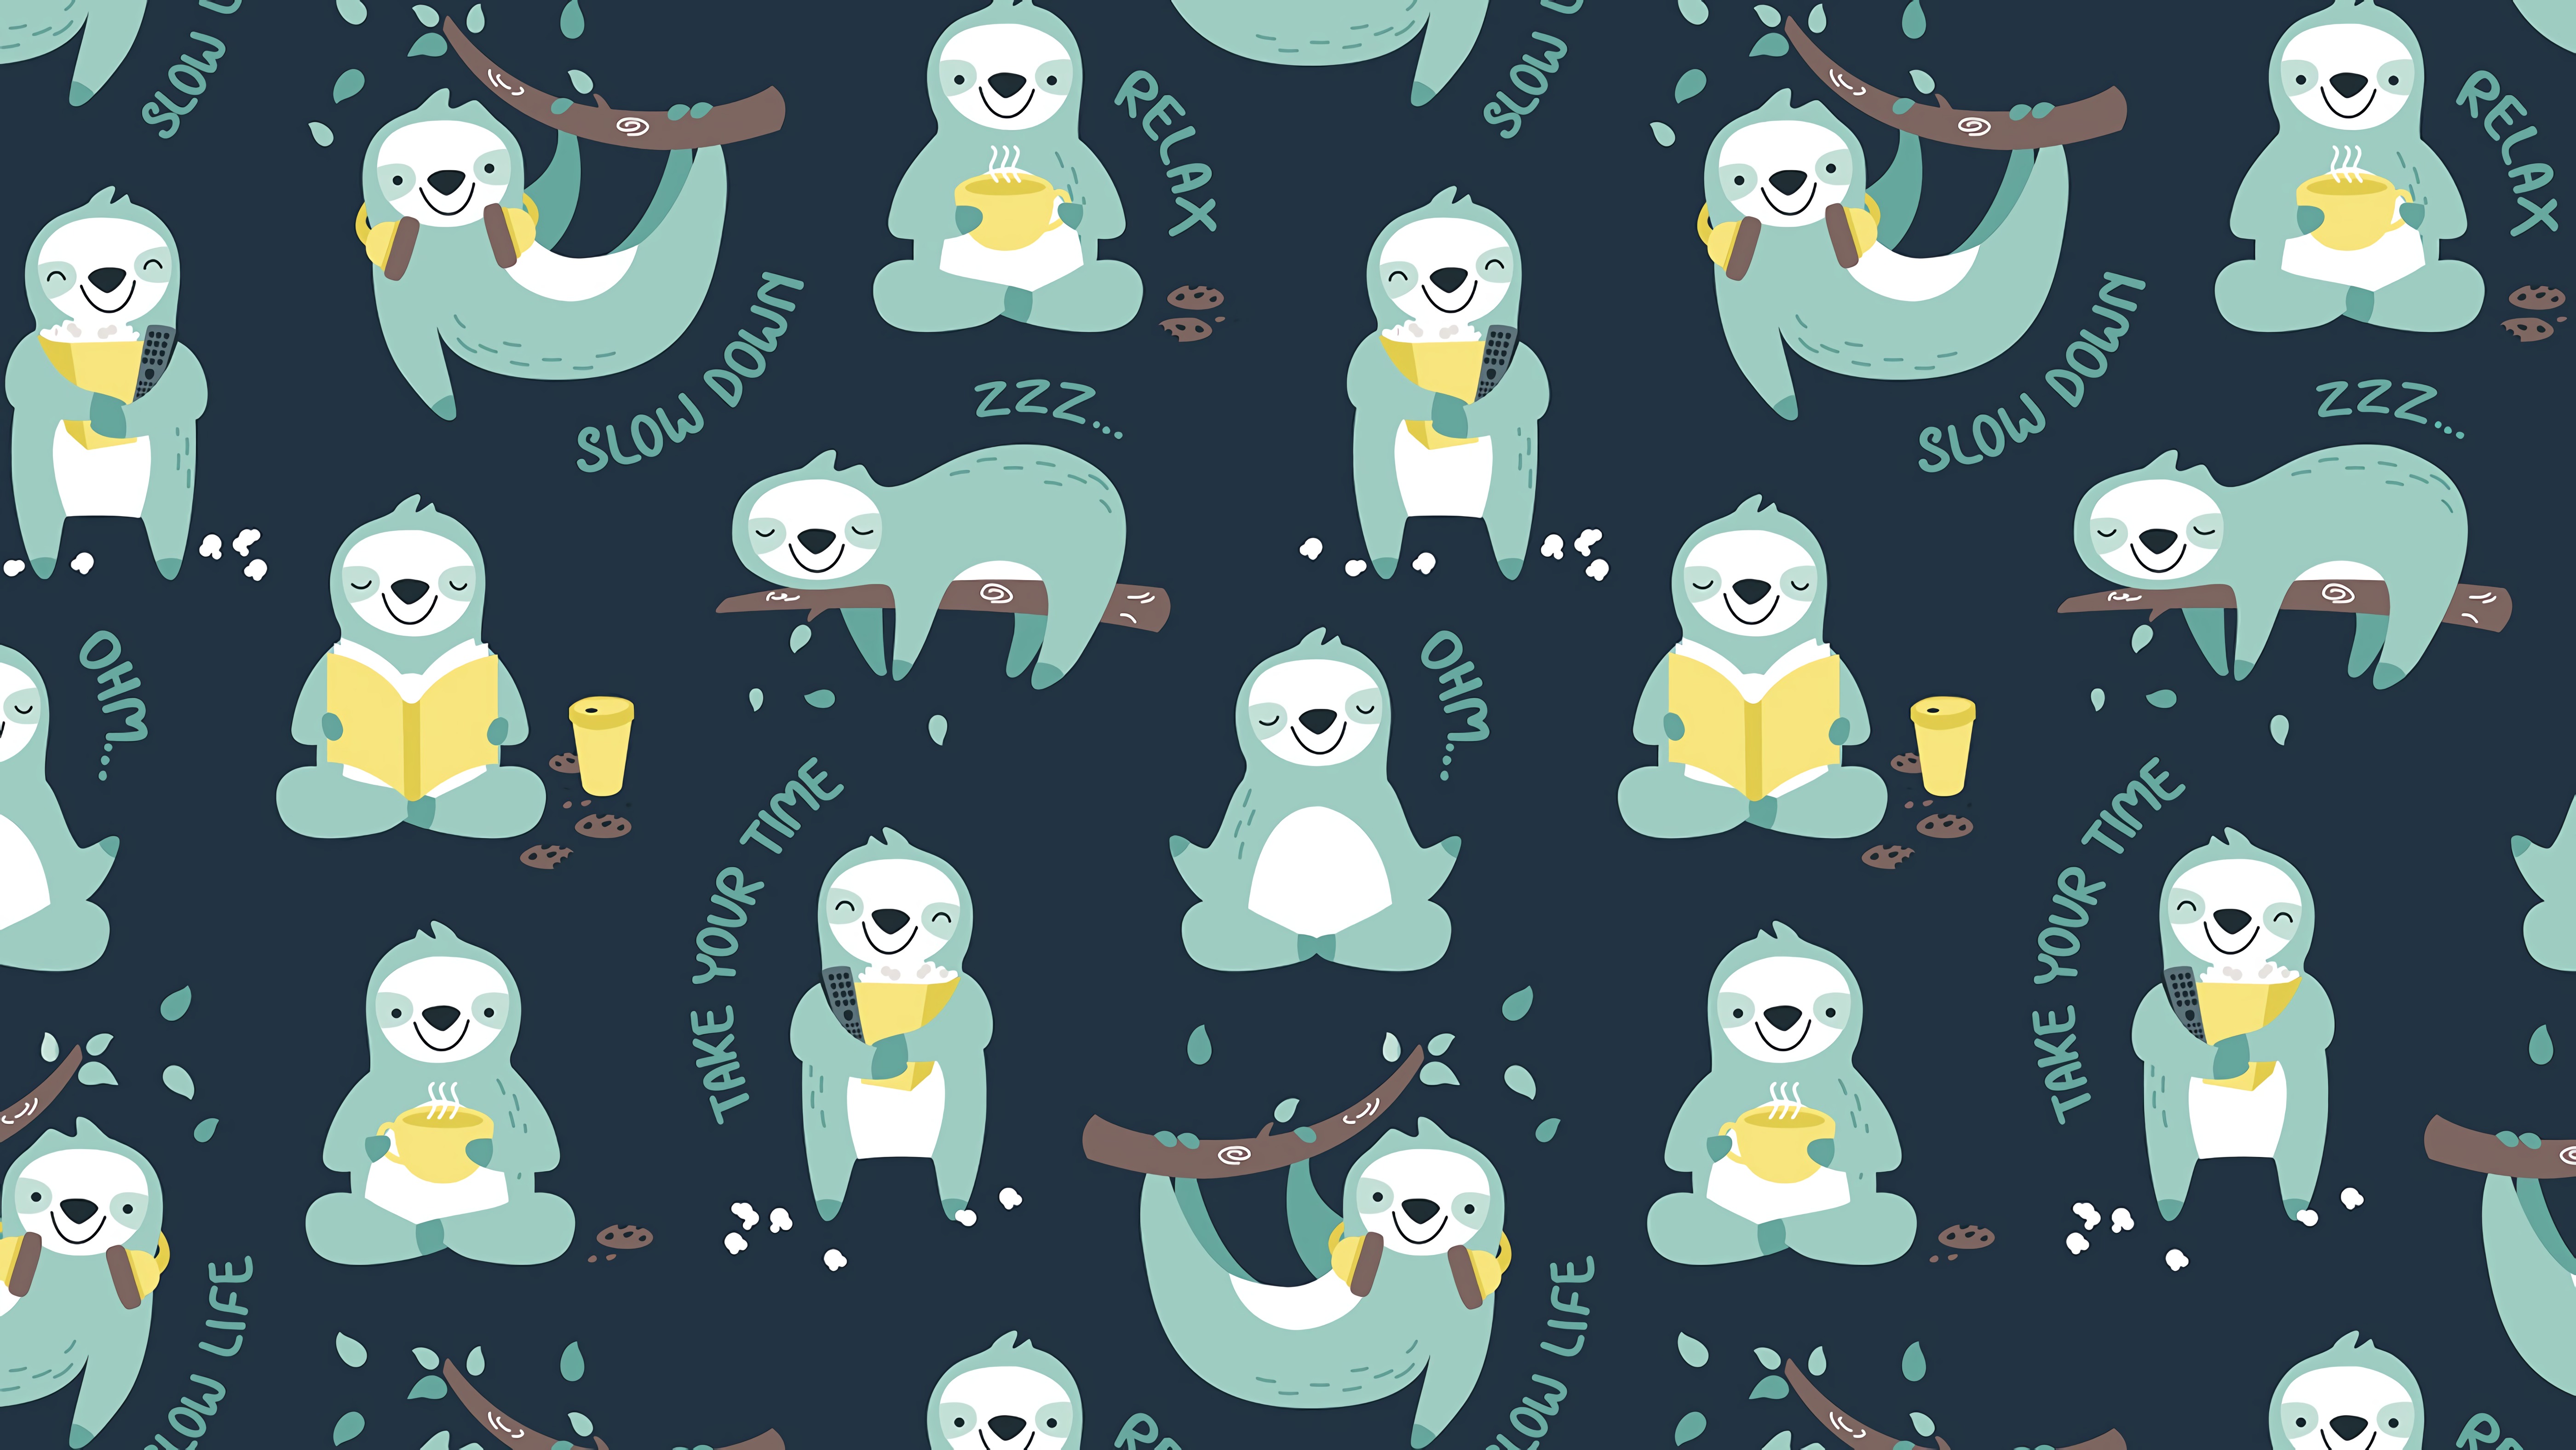 funny, art, pattern, texture, textures, relax, sloths